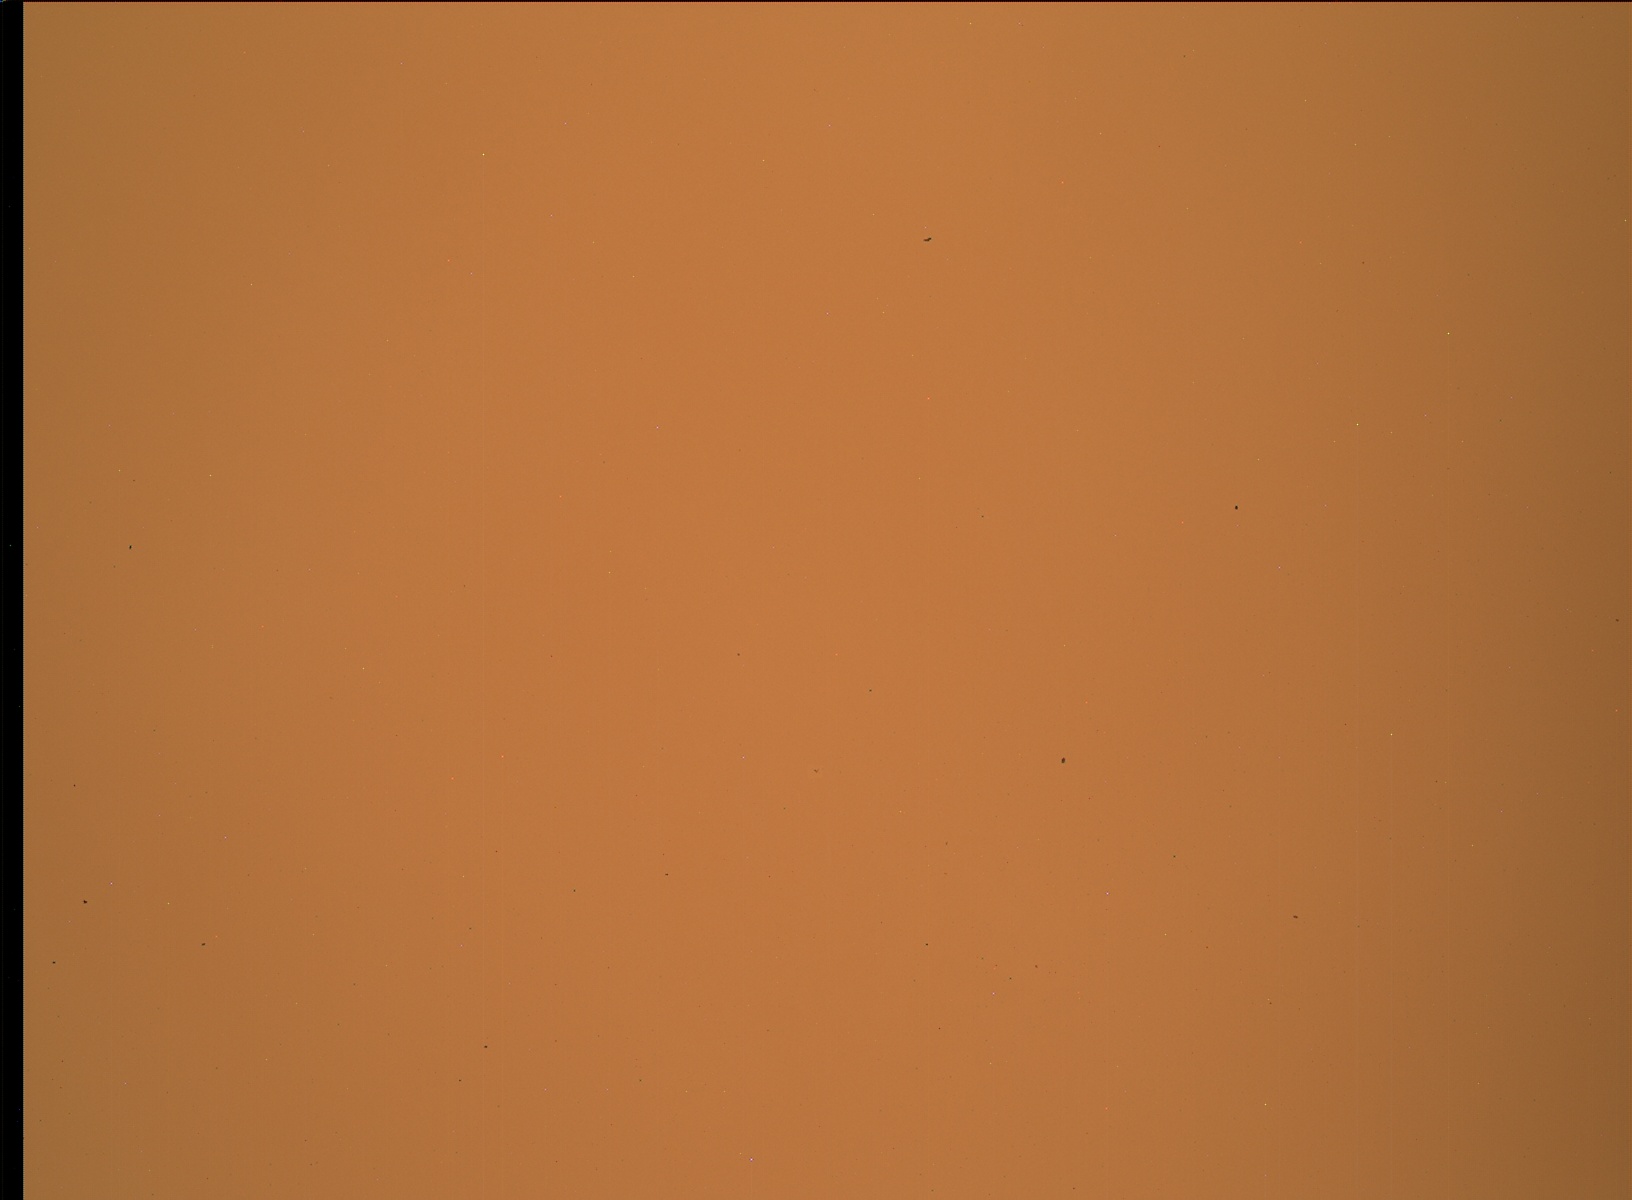 Nasa's Mars rover Curiosity acquired this image using its Mars Hand Lens Imager (MAHLI) on Sol 2776